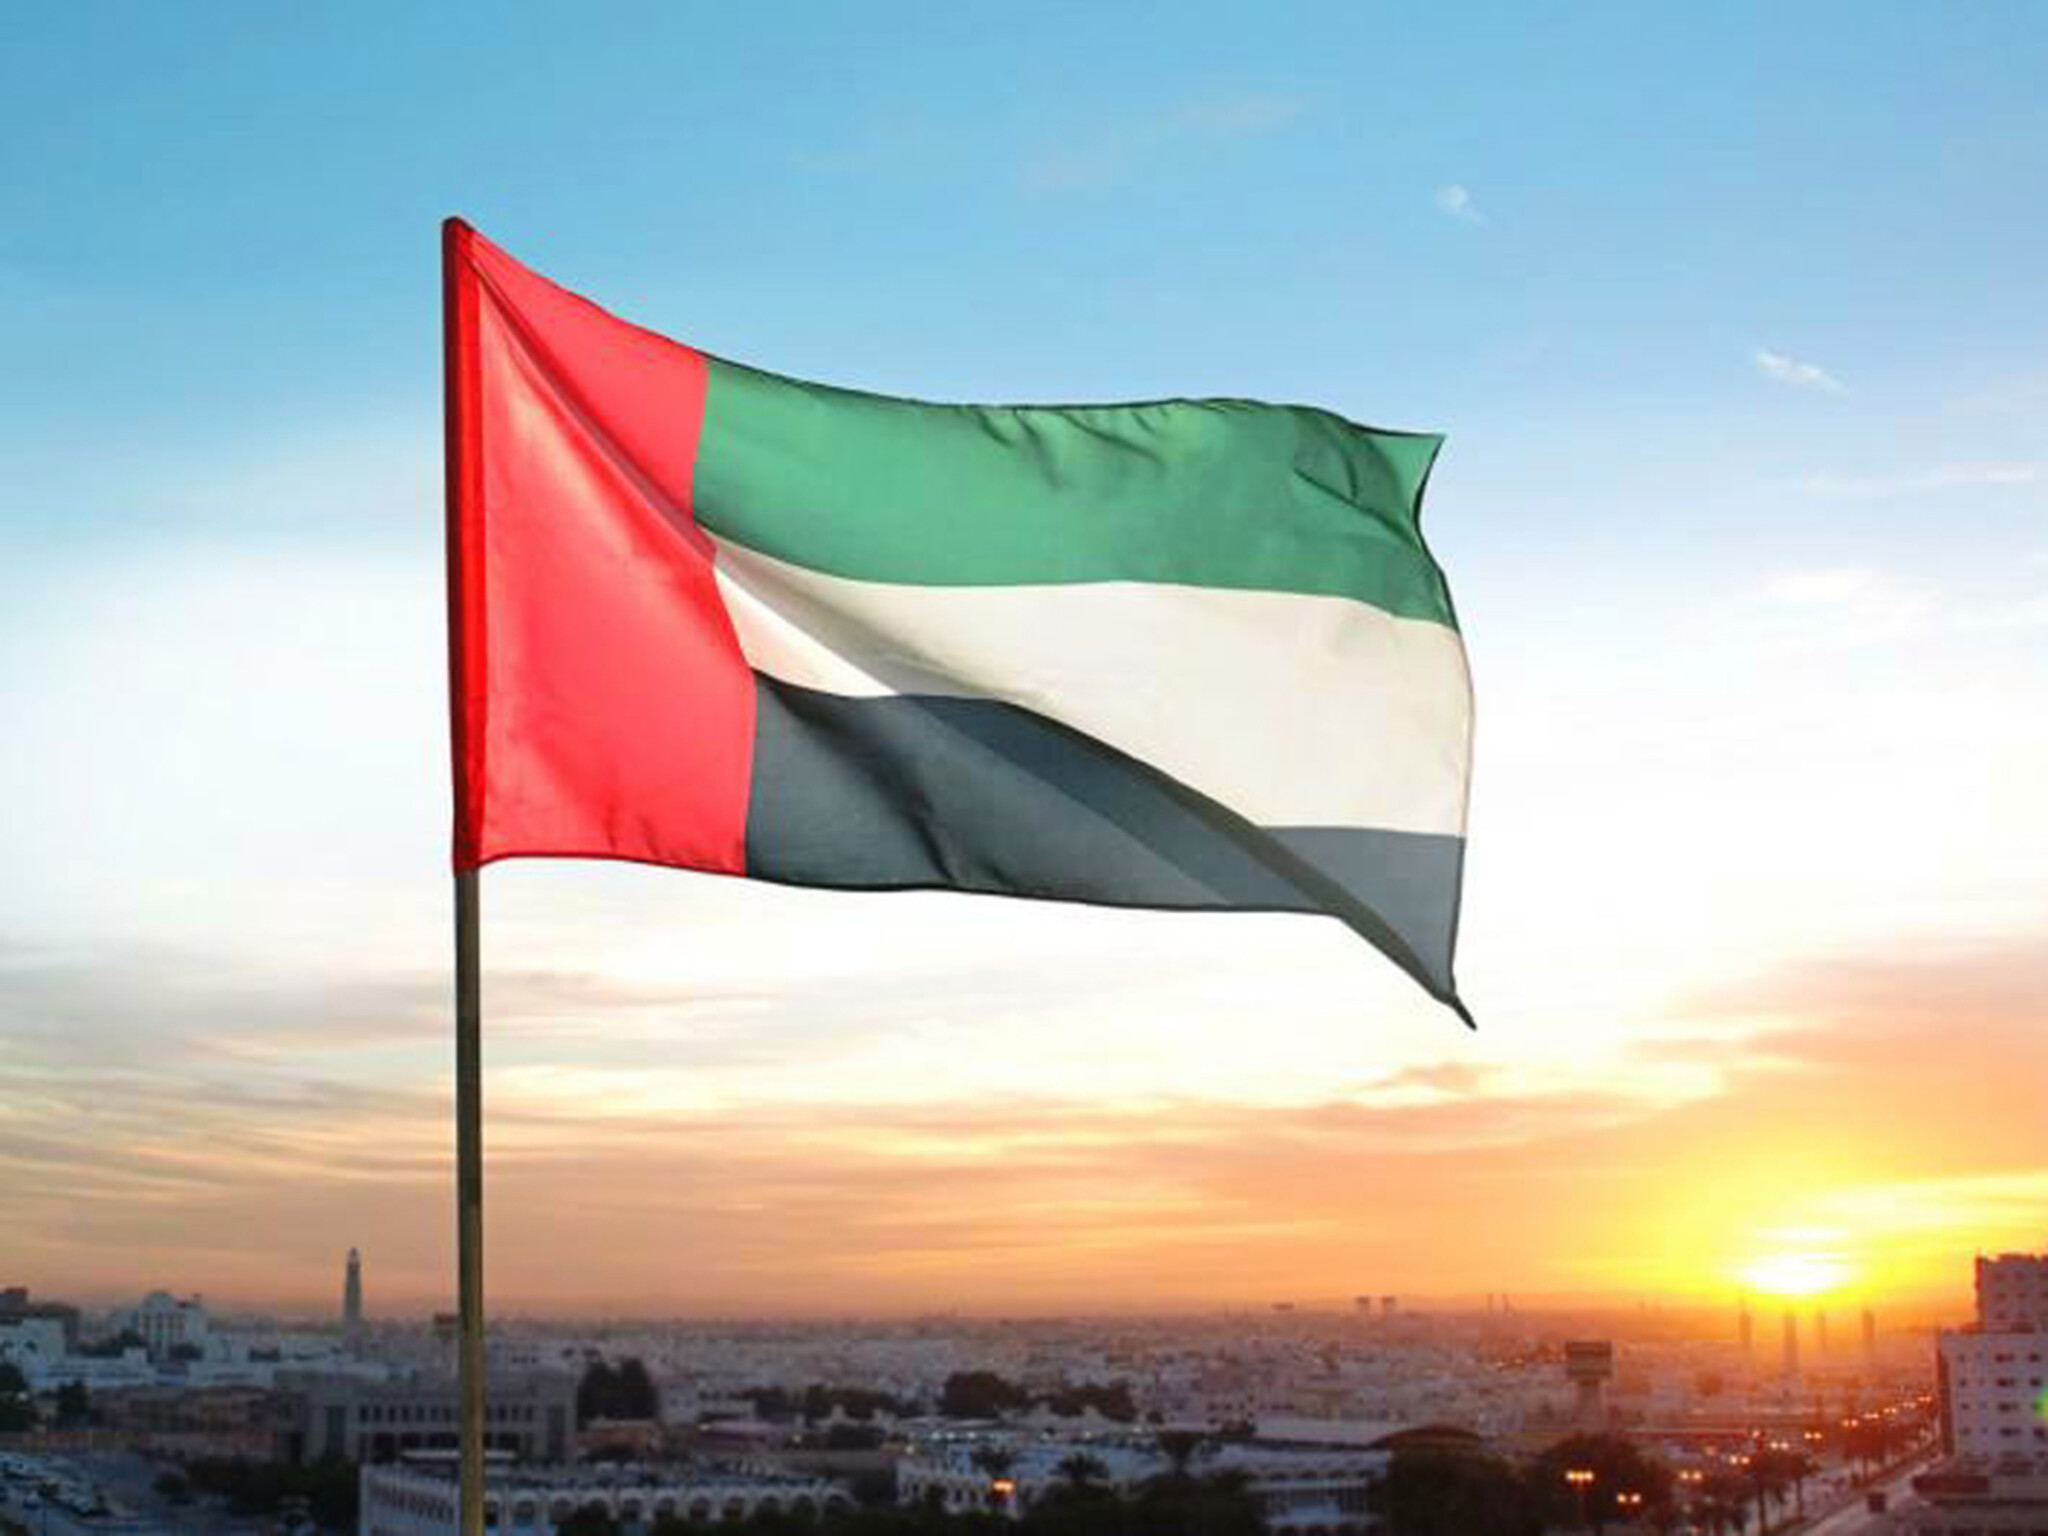 UAE citizens received a warning due to the spread of cholera in some areas.